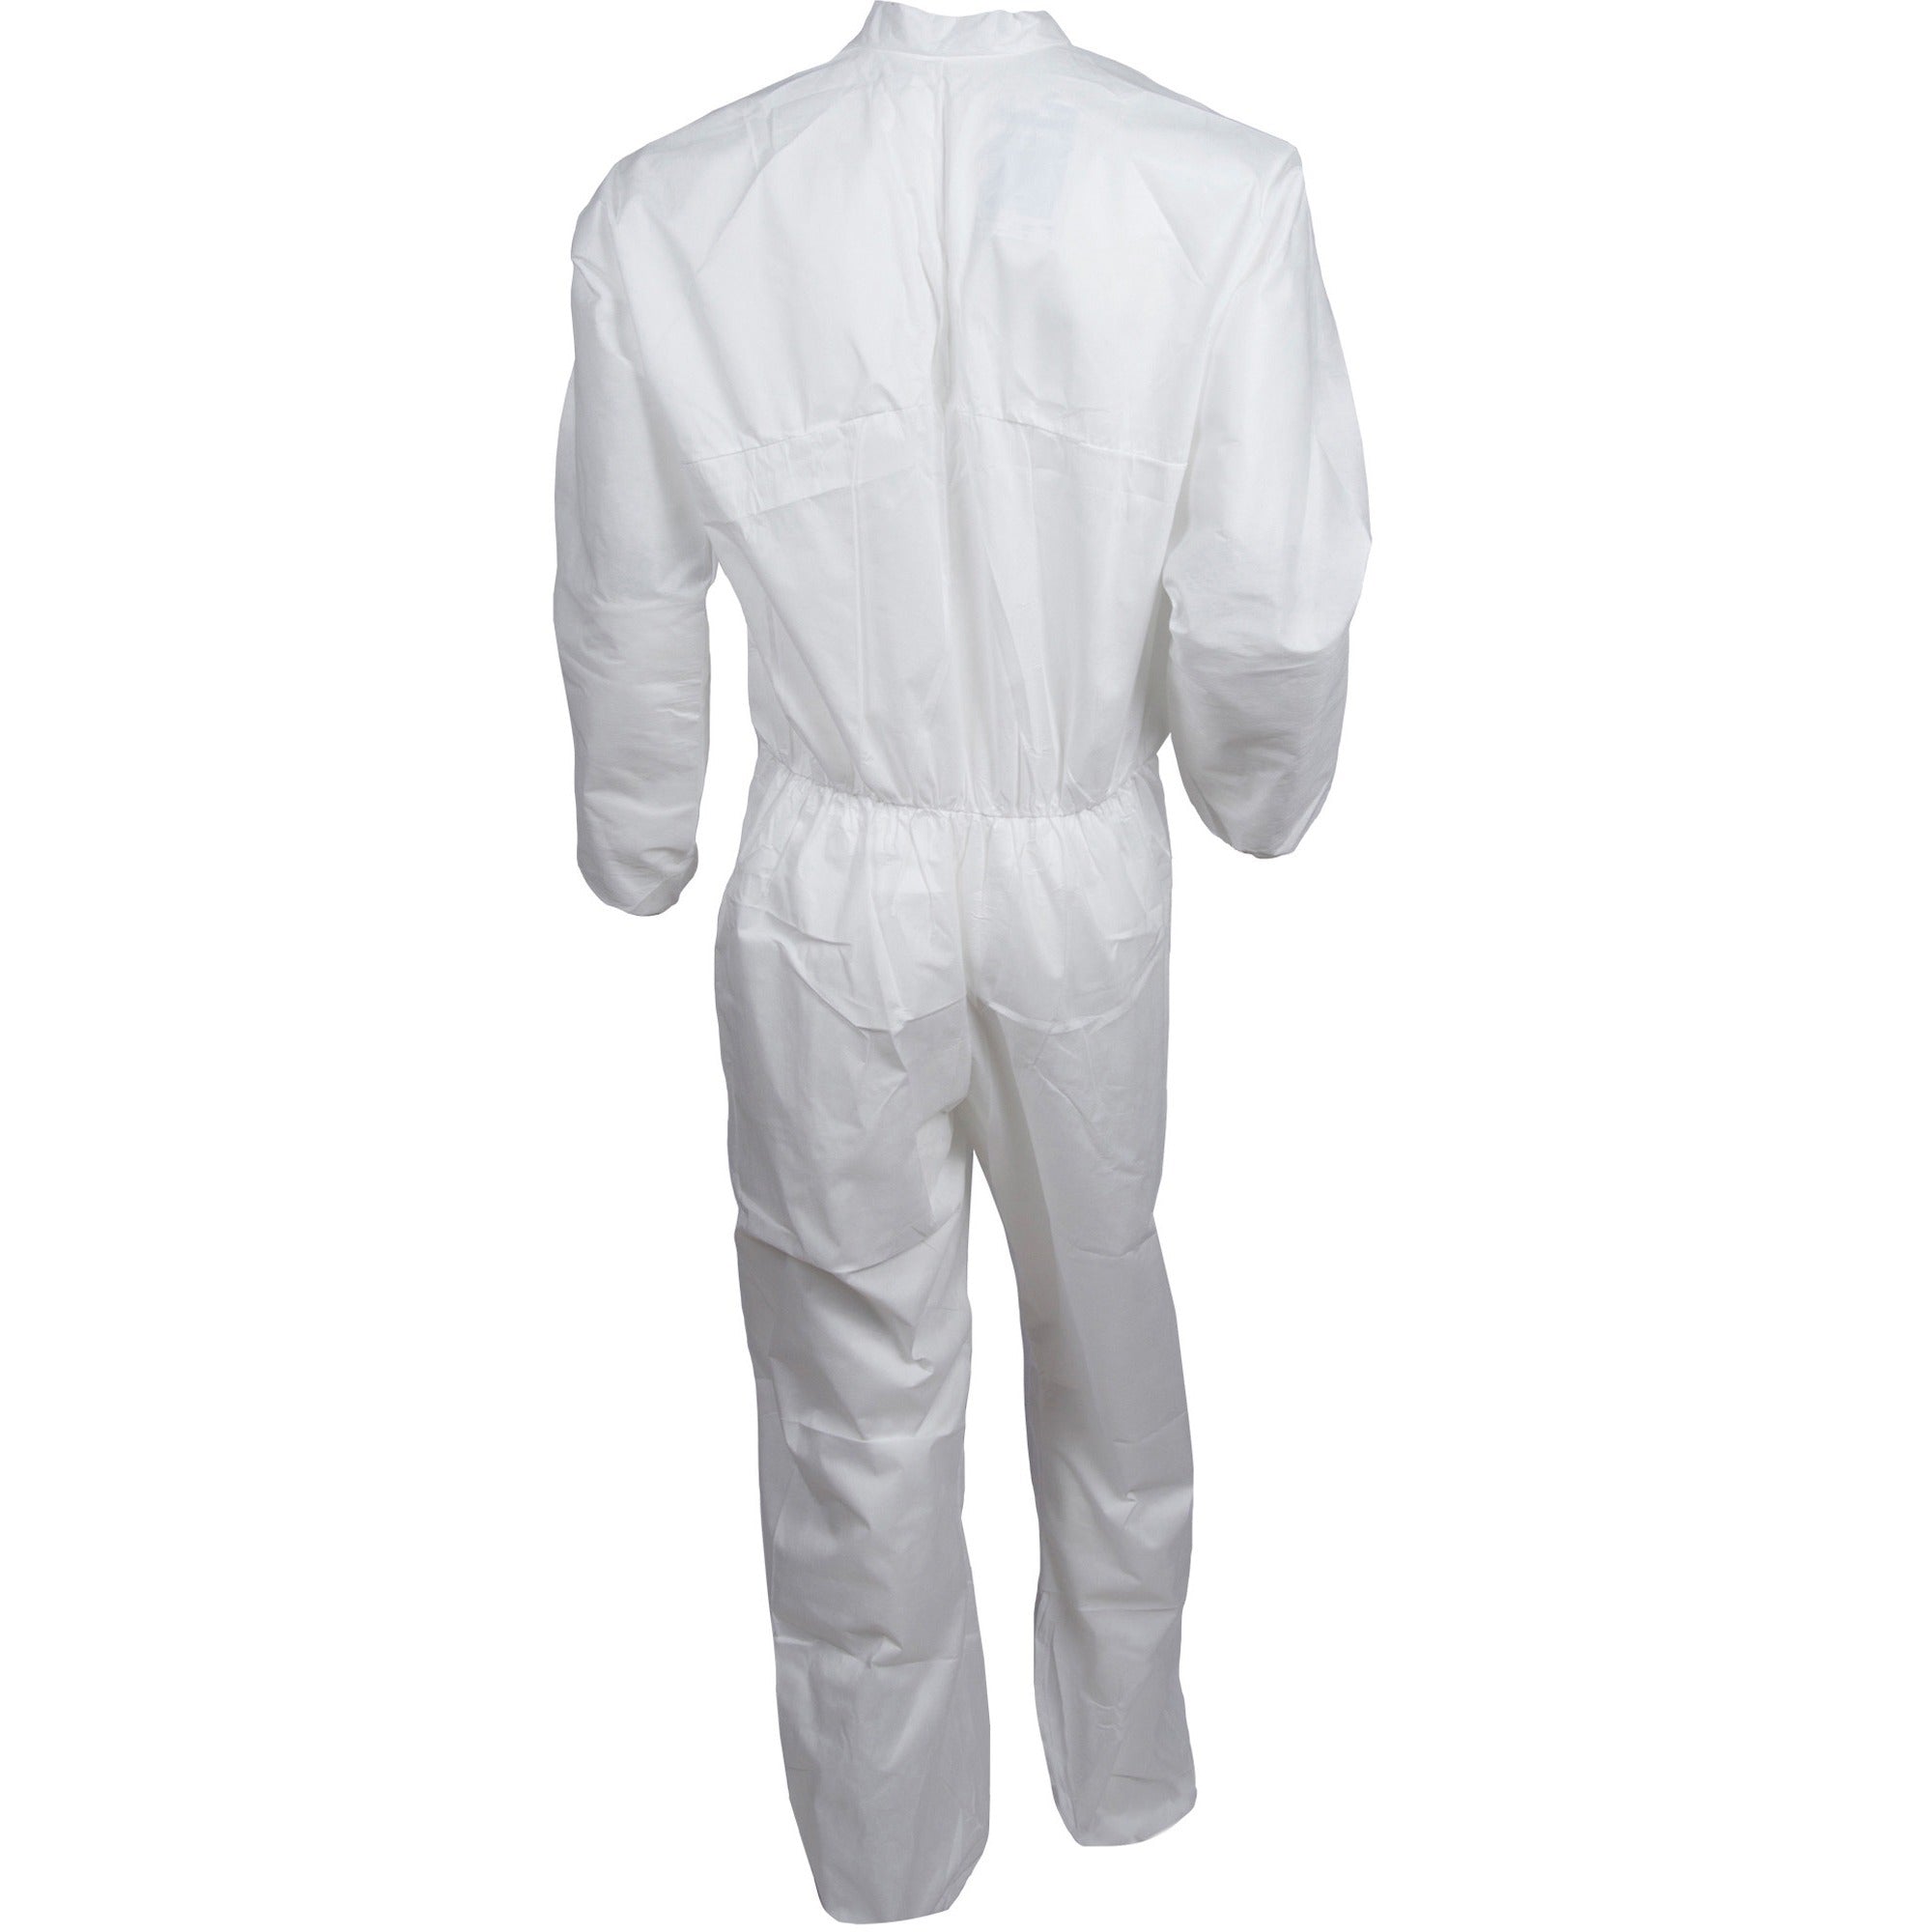 kleenguard-a40-coveralls-zipper-front-2-xtra-large-size-liquid-flying-particle-protection-white-comfortable-zipper-front-breathable-25-carton_kcc44305 - 2